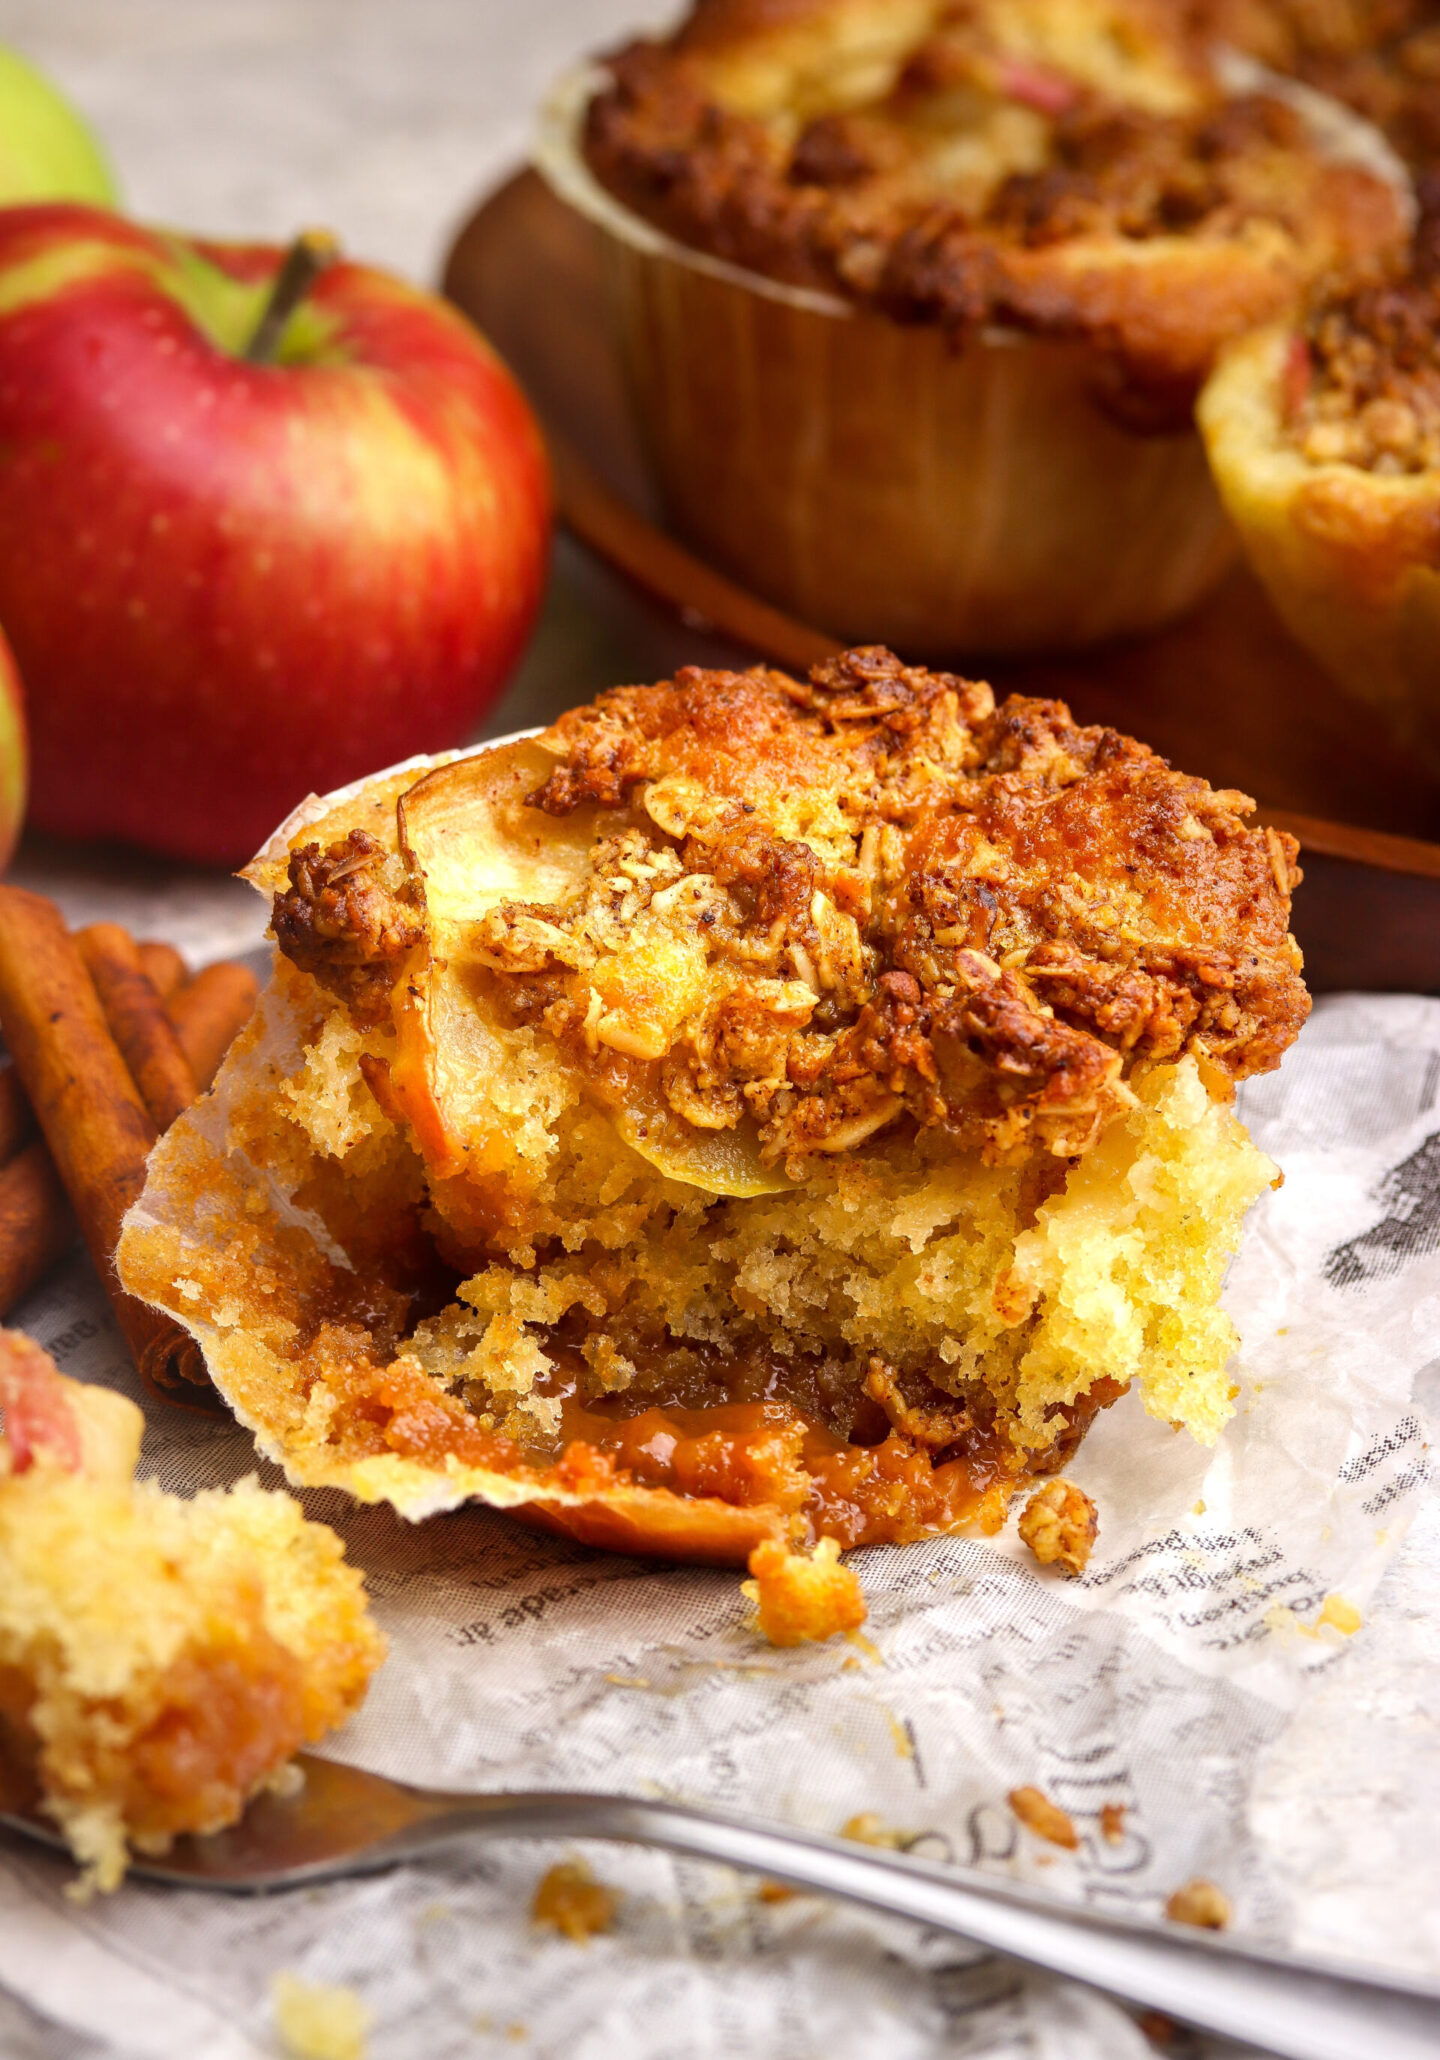 Apple Muffins with Streusel Topping & Cardamom